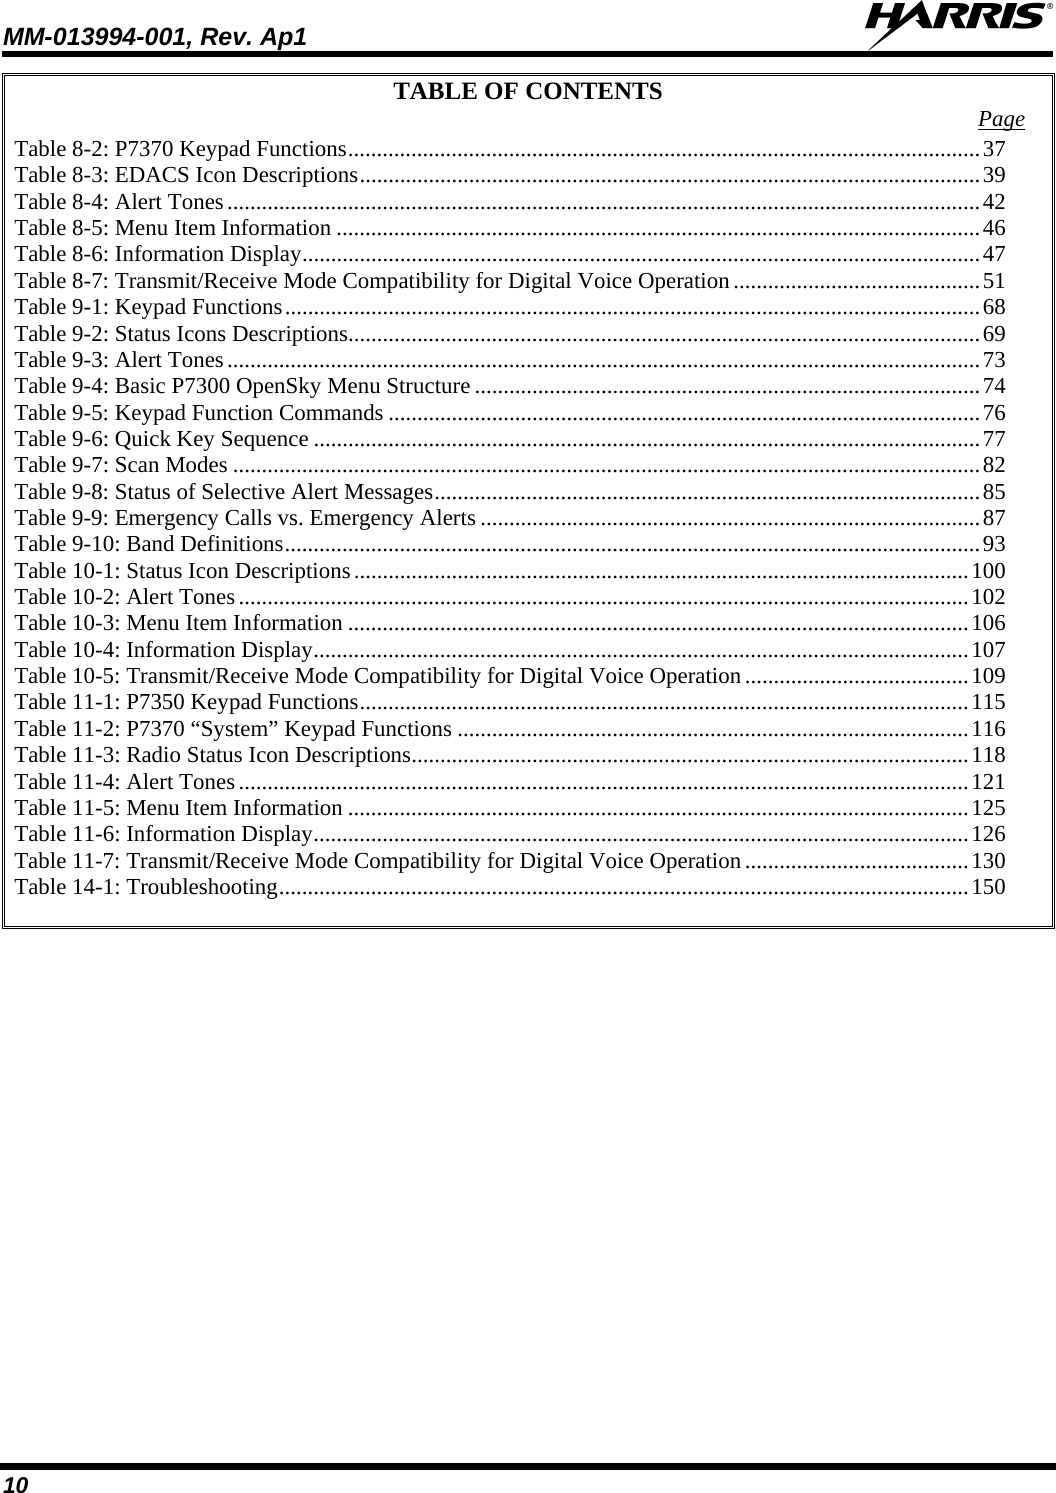 MM-013994-001, Rev. Ap1  10 TABLE OF CONTENTS  Page Table 8-2: P7370 Keypad Functions..............................................................................................................37 Table 8-3: EDACS Icon Descriptions............................................................................................................39 Table 8-4: Alert Tones...................................................................................................................................42 Table 8-5: Menu Item Information ................................................................................................................46 Table 8-6: Information Display......................................................................................................................47 Table 8-7: Transmit/Receive Mode Compatibility for Digital Voice Operation...........................................51 Table 9-1: Keypad Functions.........................................................................................................................68 Table 9-2: Status Icons Descriptions..............................................................................................................69 Table 9-3: Alert Tones...................................................................................................................................73 Table 9-4: Basic P7300 OpenSky Menu Structure ........................................................................................74 Table 9-5: Keypad Function Commands .......................................................................................................76 Table 9-6: Quick Key Sequence ....................................................................................................................77 Table 9-7: Scan Modes ..................................................................................................................................82 Table 9-8: Status of Selective Alert Messages...............................................................................................85 Table 9-9: Emergency Calls vs. Emergency Alerts .......................................................................................87 Table 9-10: Band Definitions.........................................................................................................................93 Table 10-1: Status Icon Descriptions...........................................................................................................100 Table 10-2: Alert Tones...............................................................................................................................102 Table 10-3: Menu Item Information ............................................................................................................106 Table 10-4: Information Display..................................................................................................................107 Table 10-5: Transmit/Receive Mode Compatibility for Digital Voice Operation.......................................109 Table 11-1: P7350 Keypad Functions..........................................................................................................115 Table 11-2: P7370 “System” Keypad Functions .........................................................................................116 Table 11-3: Radio Status Icon Descriptions.................................................................................................118 Table 11-4: Alert Tones...............................................................................................................................121 Table 11-5: Menu Item Information ............................................................................................................125 Table 11-6: Information Display..................................................................................................................126 Table 11-7: Transmit/Receive Mode Compatibility for Digital Voice Operation.......................................130 Table 14-1: Troubleshooting........................................................................................................................150   